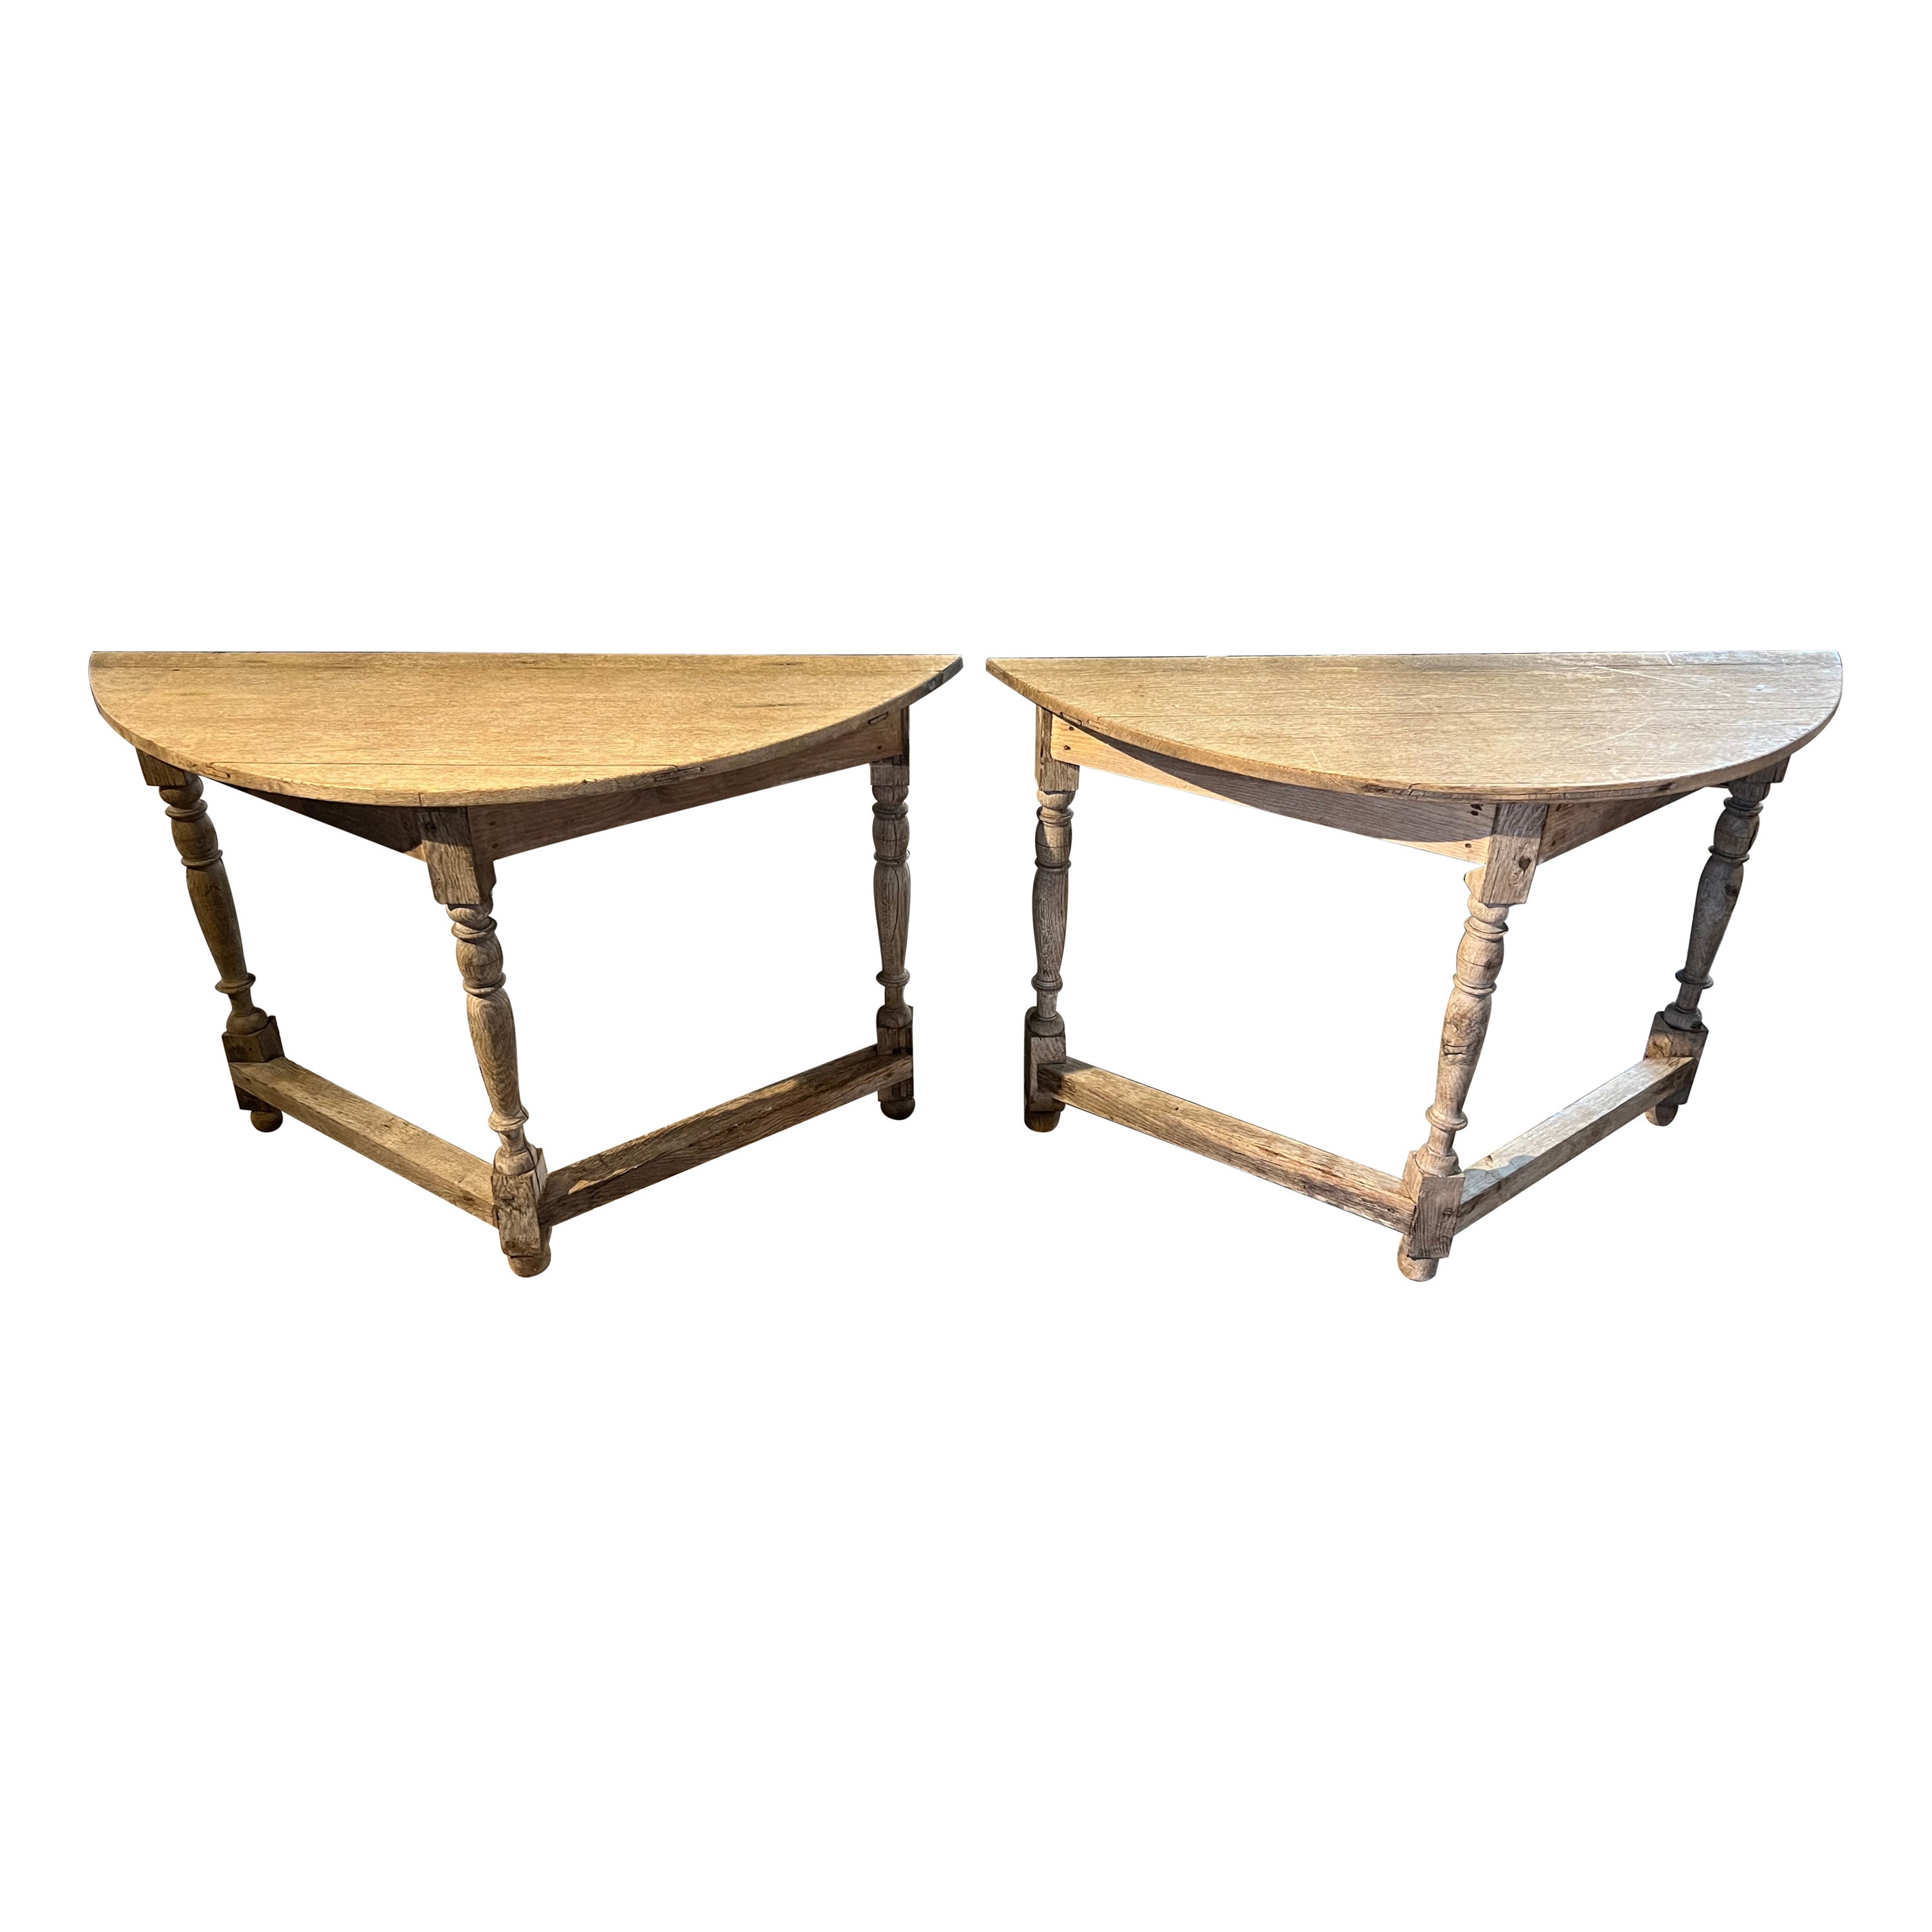 Pair of 19th Century French Demi Lune Console Tables